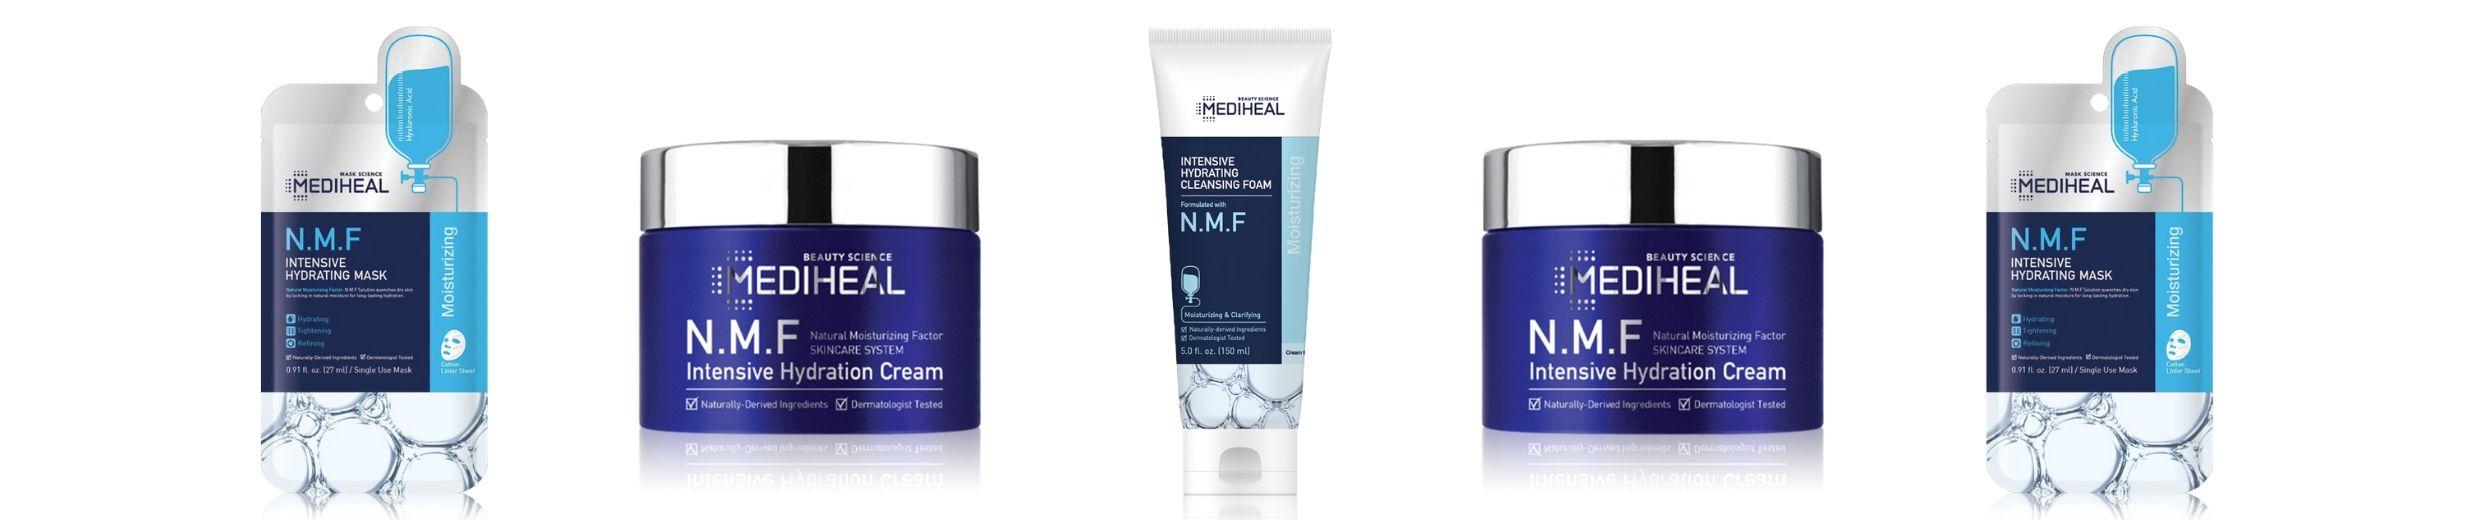 Maximum Moisture? A Look at Mediheal N.M.F. Intensive Hydrating Cleanser and Cream